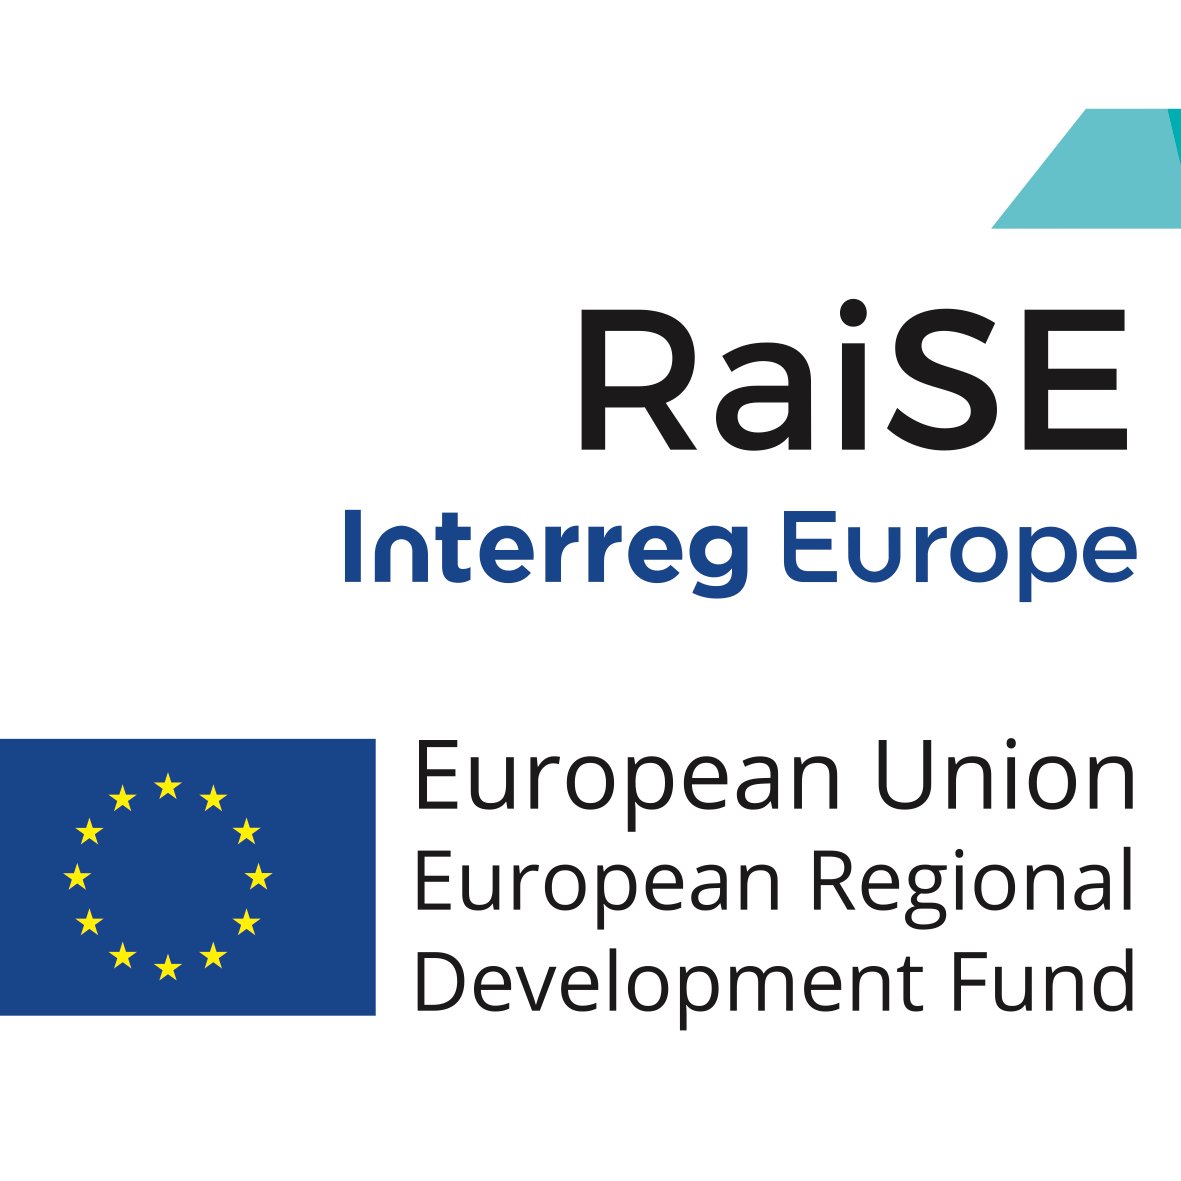 Enhancing social enterprises competitiveness through improved business support policies. Interreg Europe project. 2017-2022